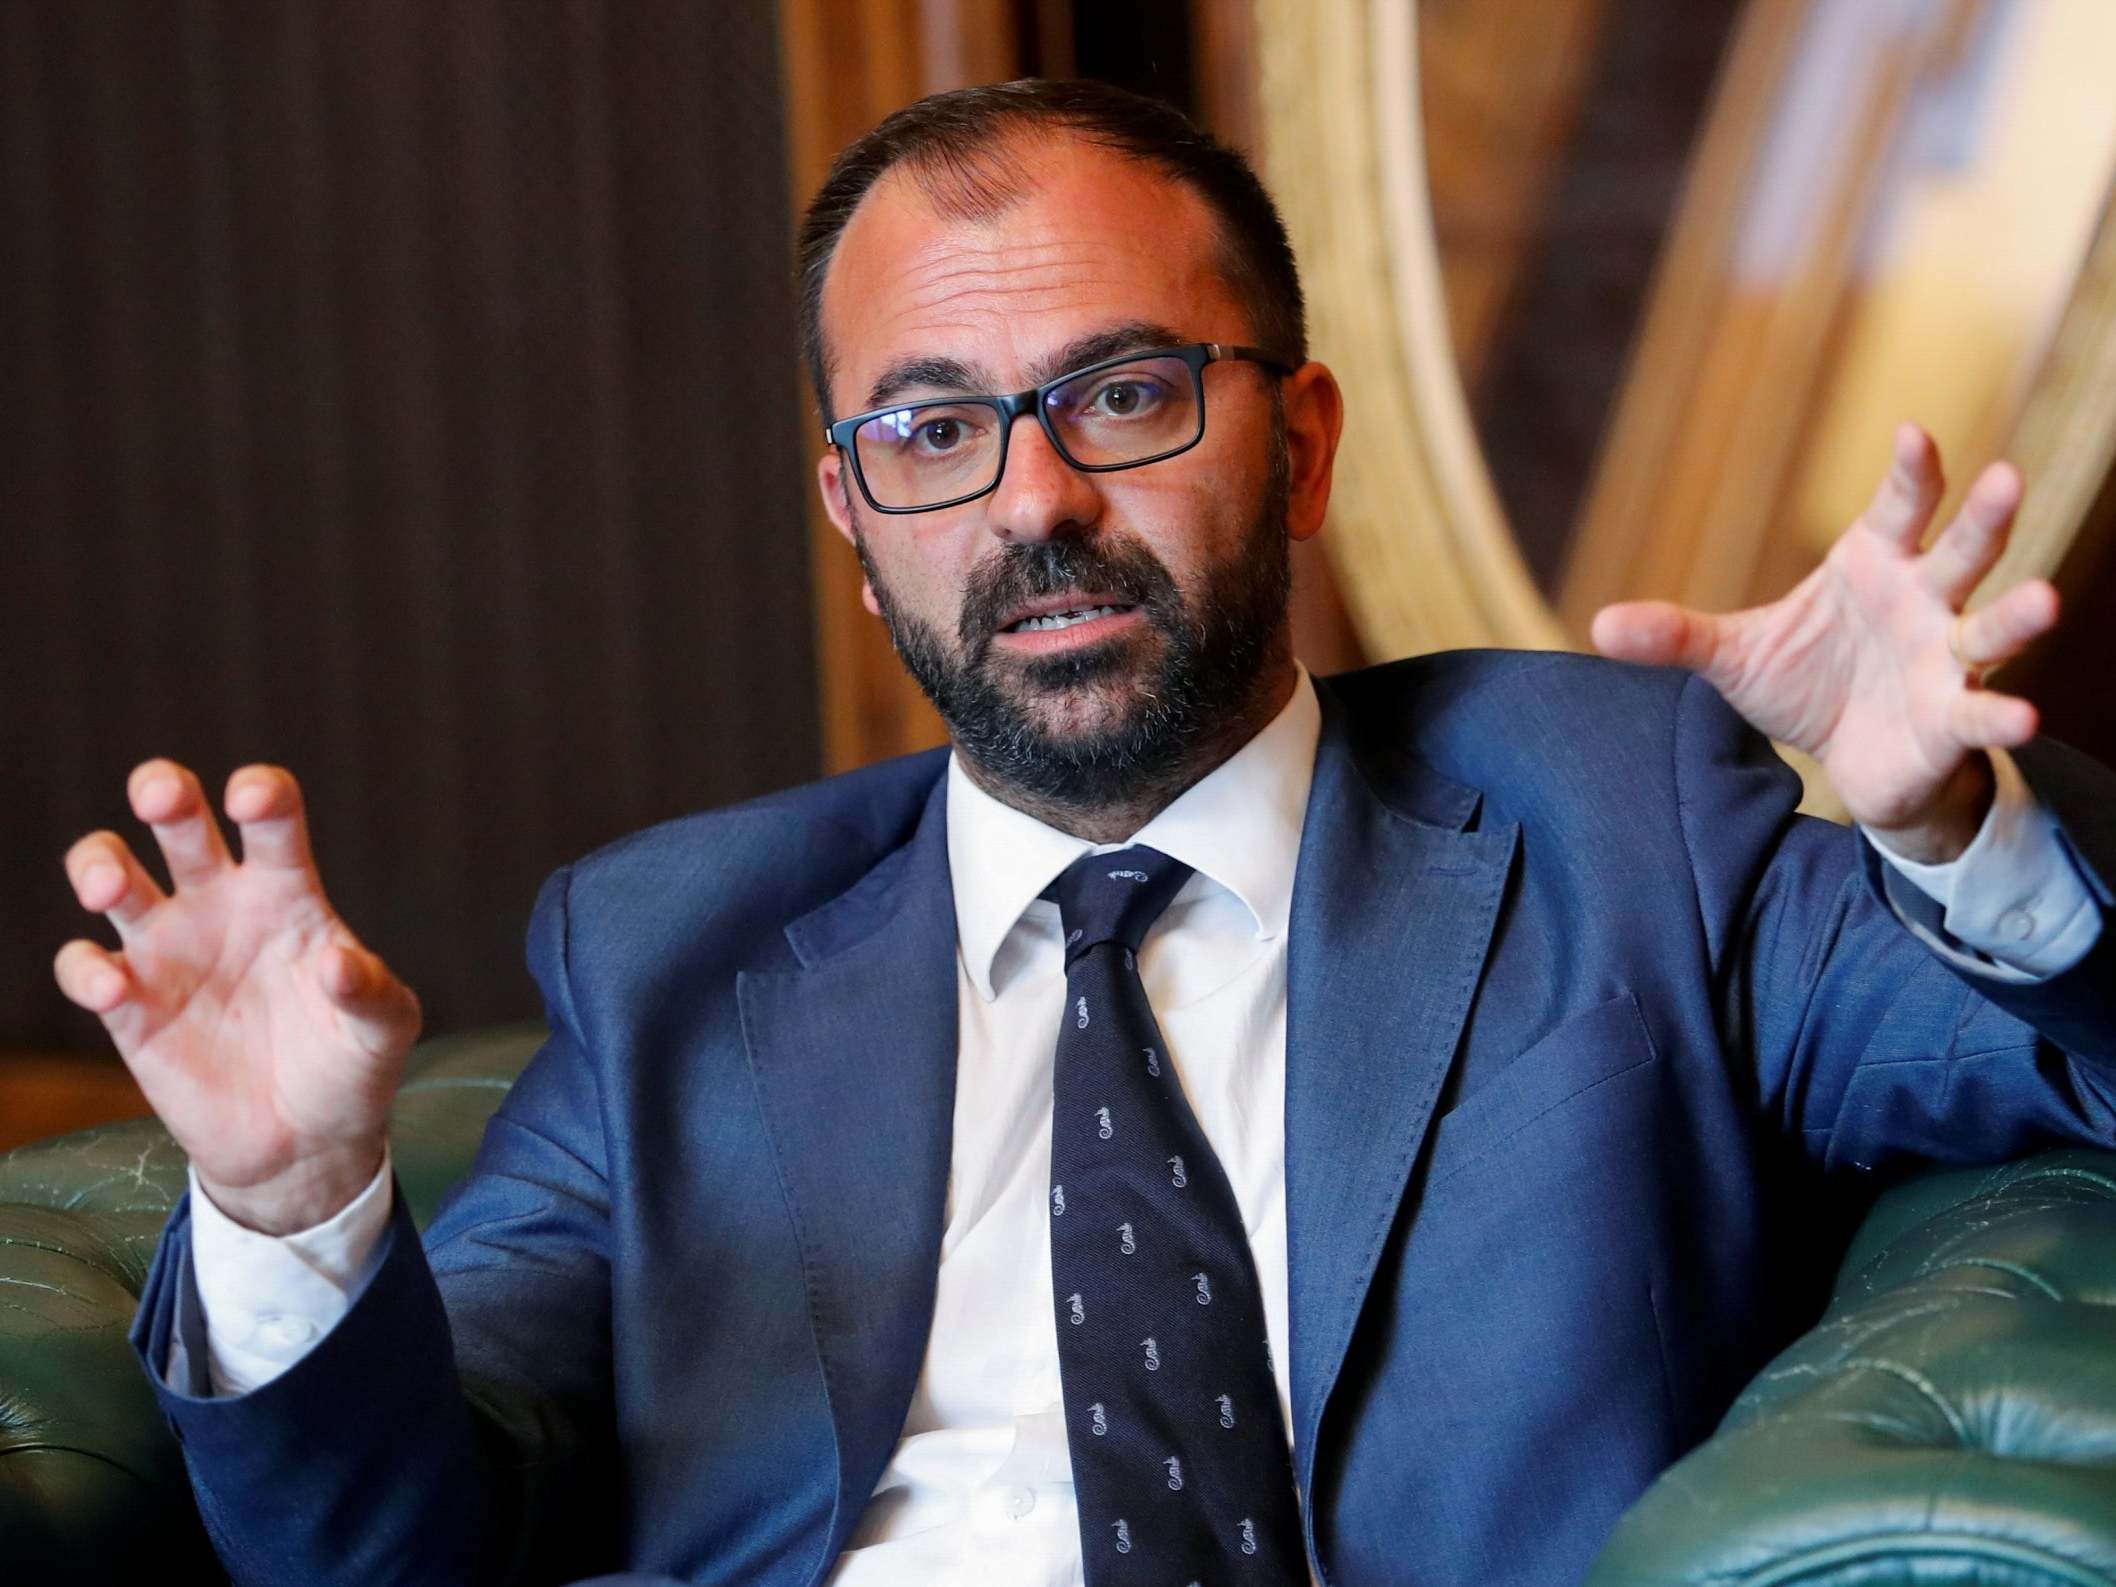 Italy’s education minister Lorenzo Fioramonti during an interview in Rome on Monday (Reuters)